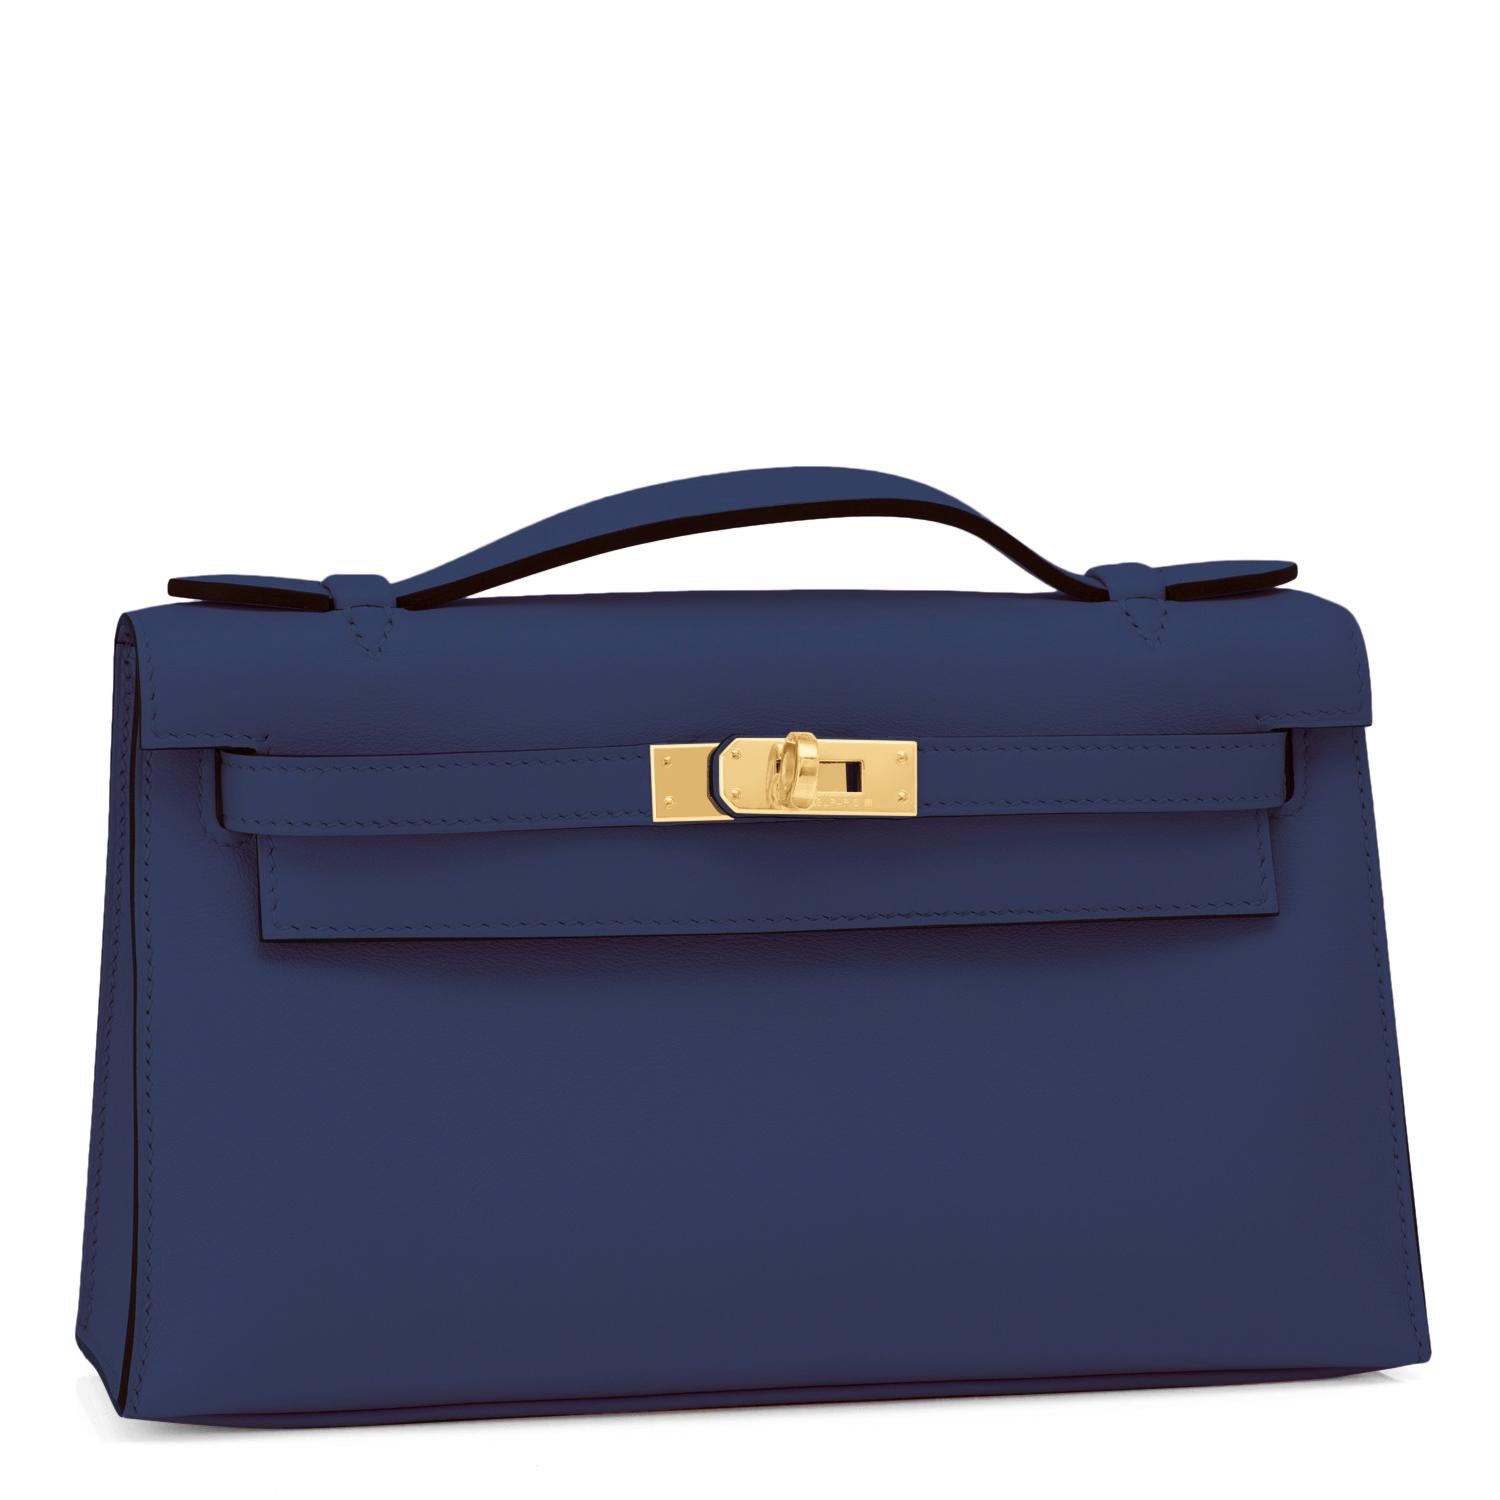 Hermes Kelly Pochette Navy Blue Gold Hardware Clutch Cut Bag Y Stamp, 2020
Just purchased from Hermes store; bag bears new 2020 interior Y Stamp.
Brand New in Box. Store fresh. Pristine condition (with plastic on hardware).
Perfect gift! Comes with